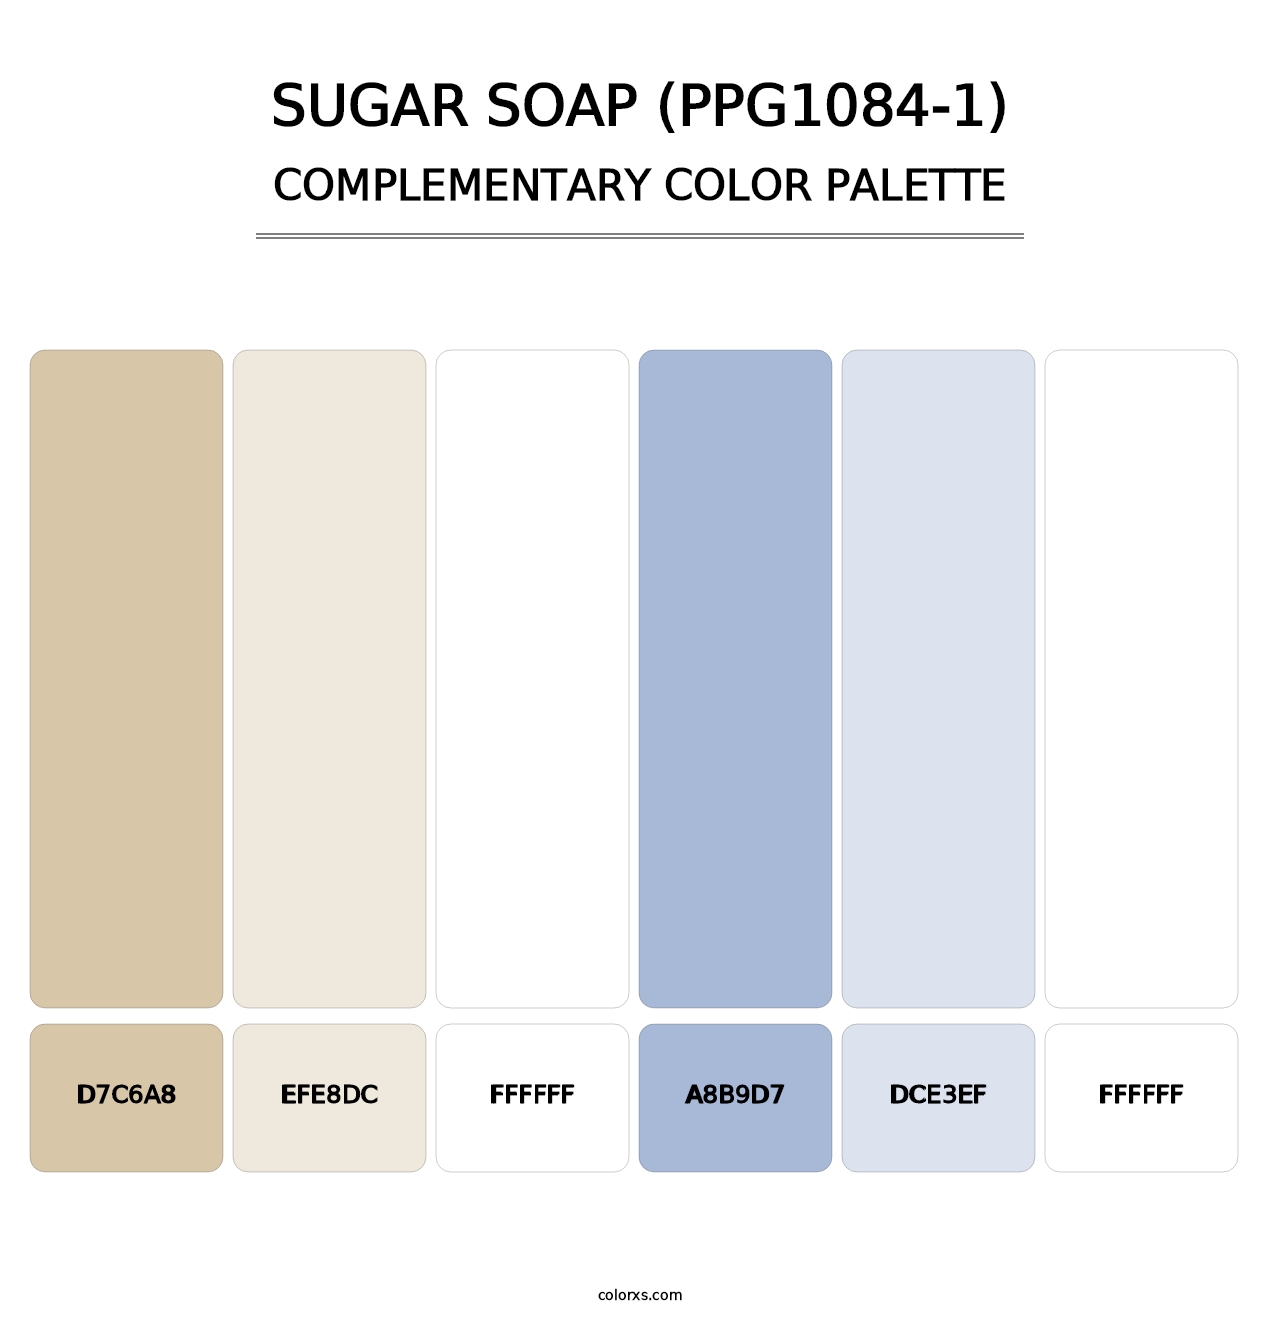 Sugar Soap (PPG1084-1) - Complementary Color Palette